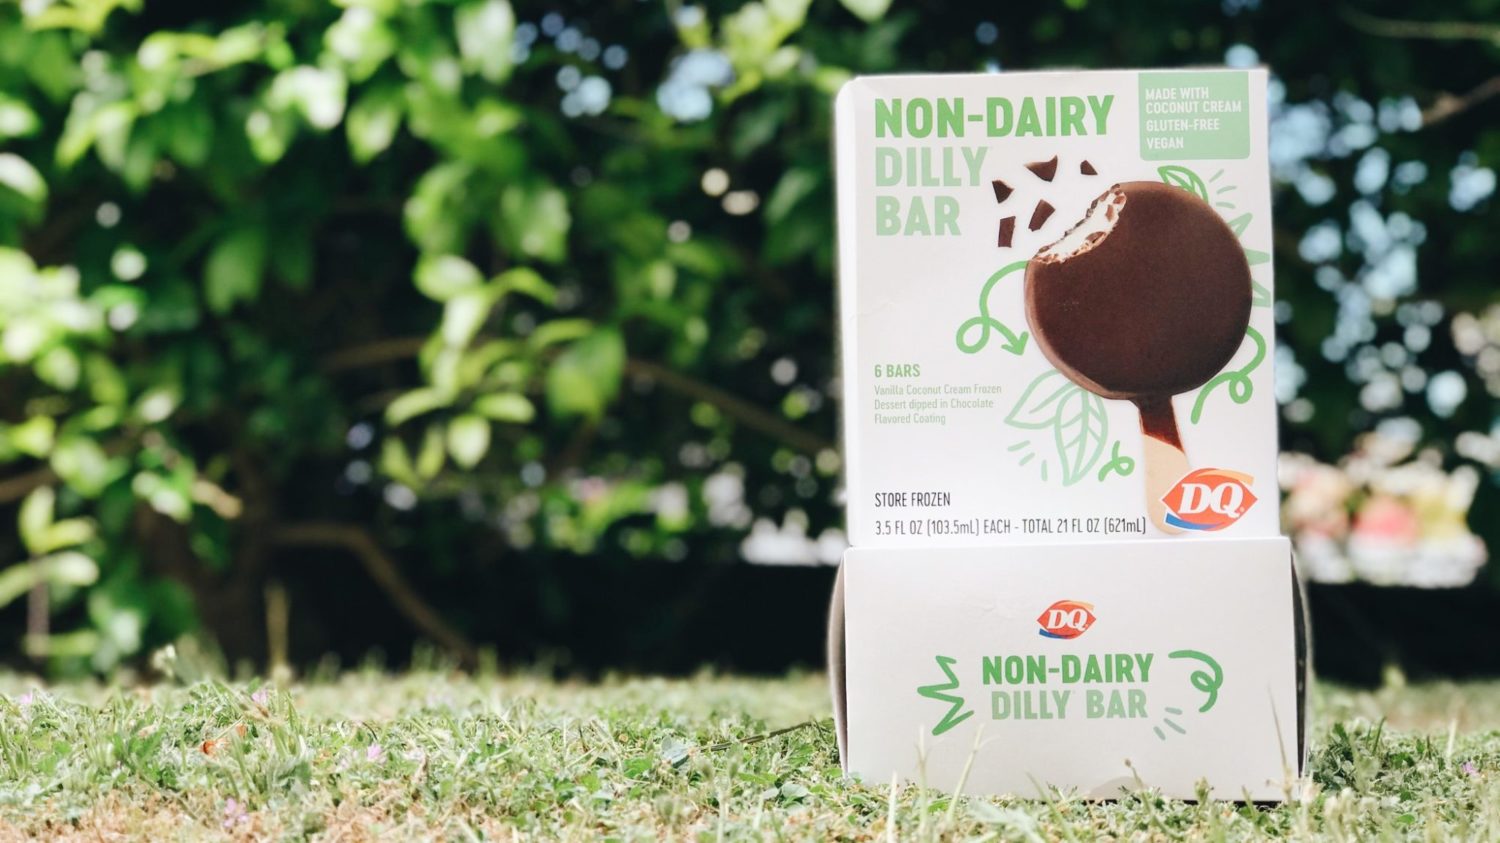 Vegan Dilly Bars Now At Every Dairy Queen in Canada